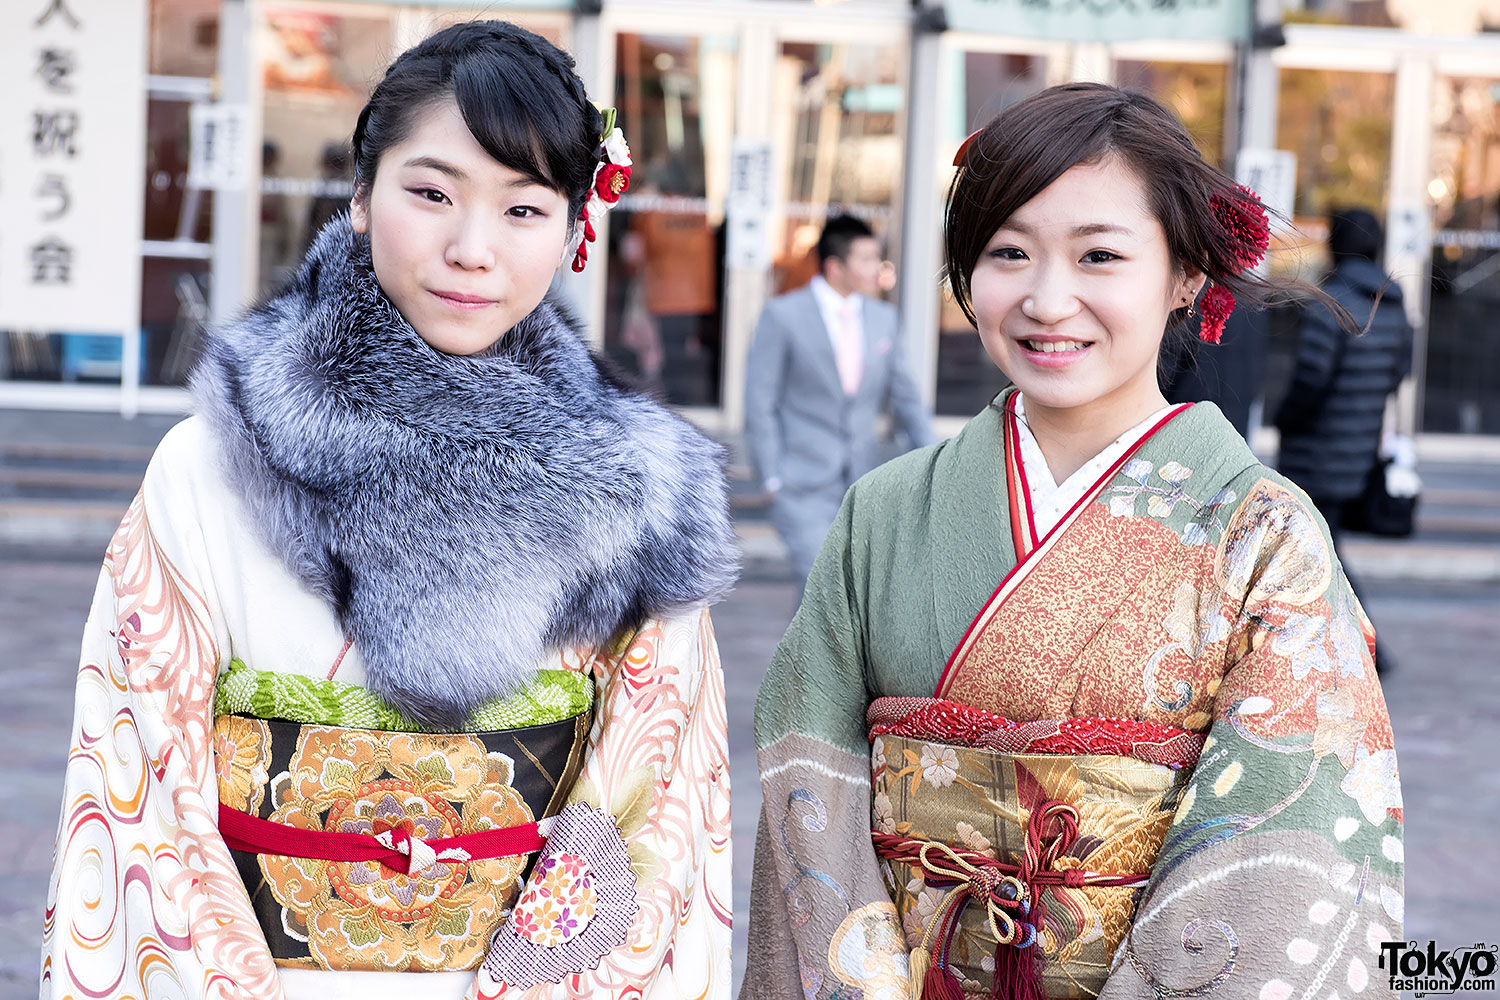 Age of japan. Япония 2015. Coming of age Day in Japan. Coming of age Day.